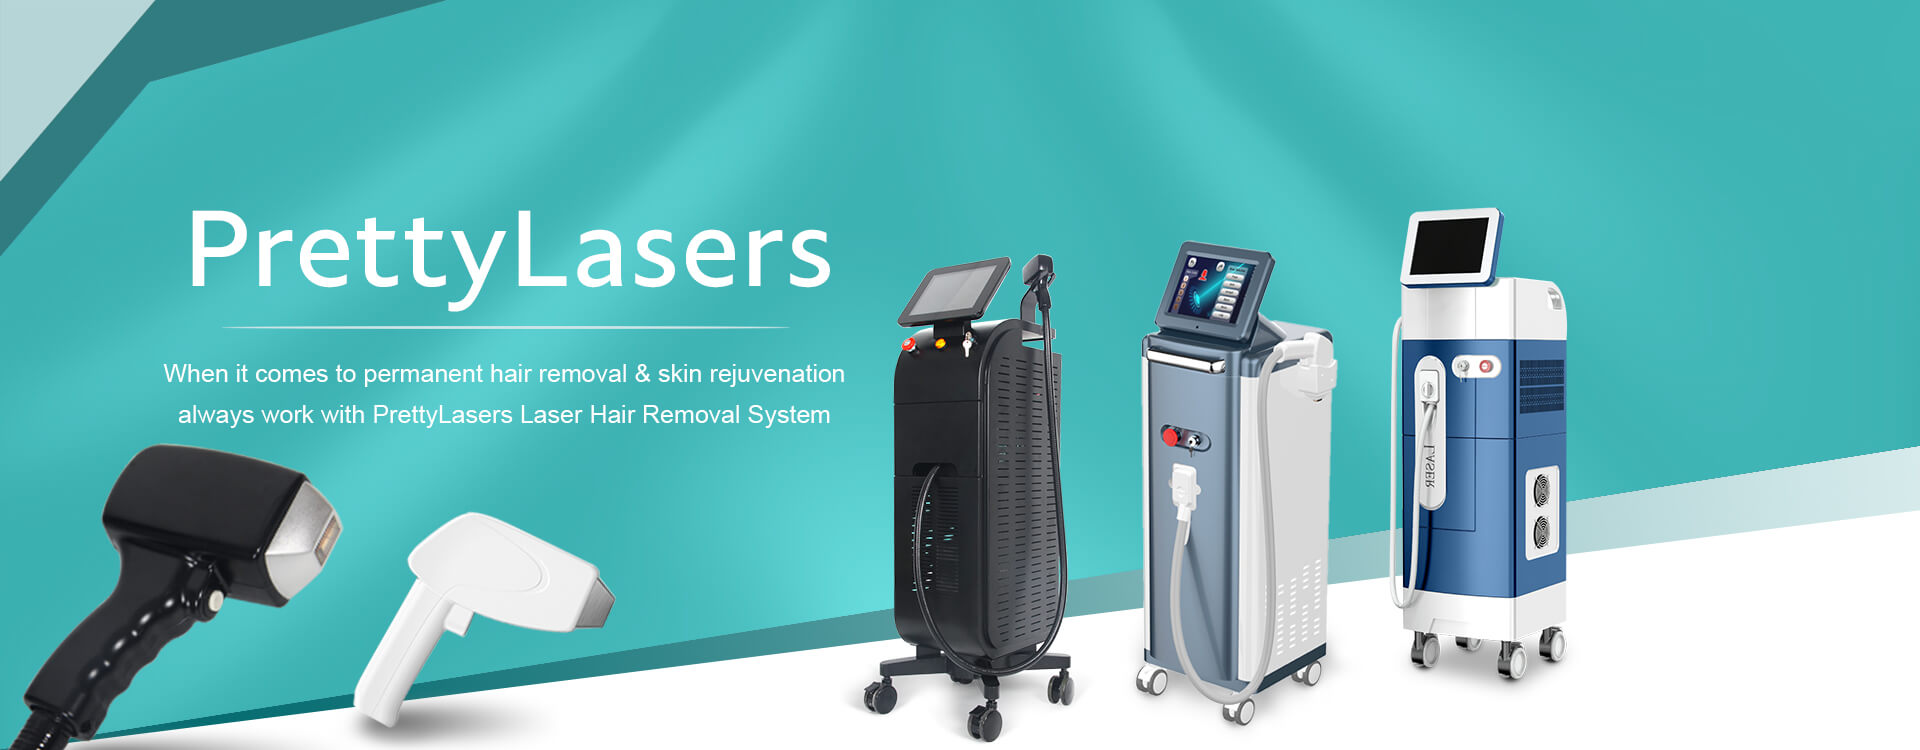 Whole 808nm Diode Laser Hair Removal Machine Manufacturer and